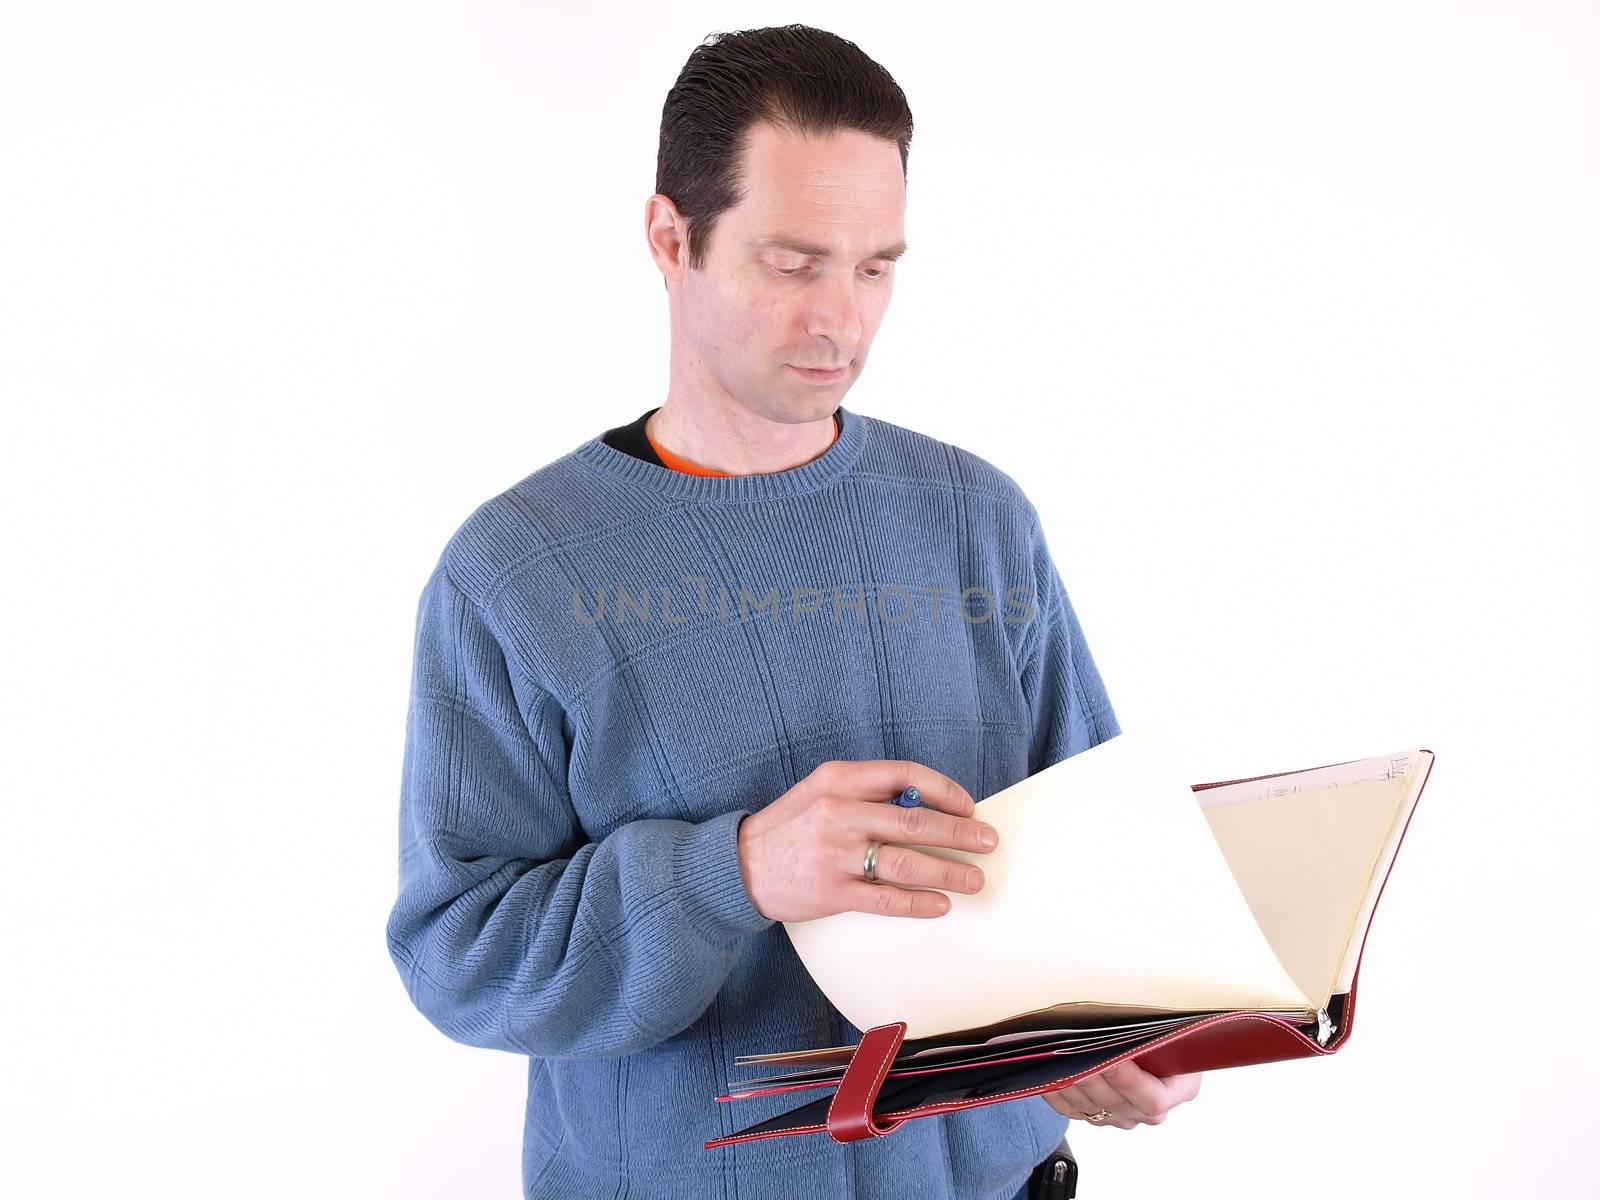 An adult male looking over notes in a binder, isolated against a white background.